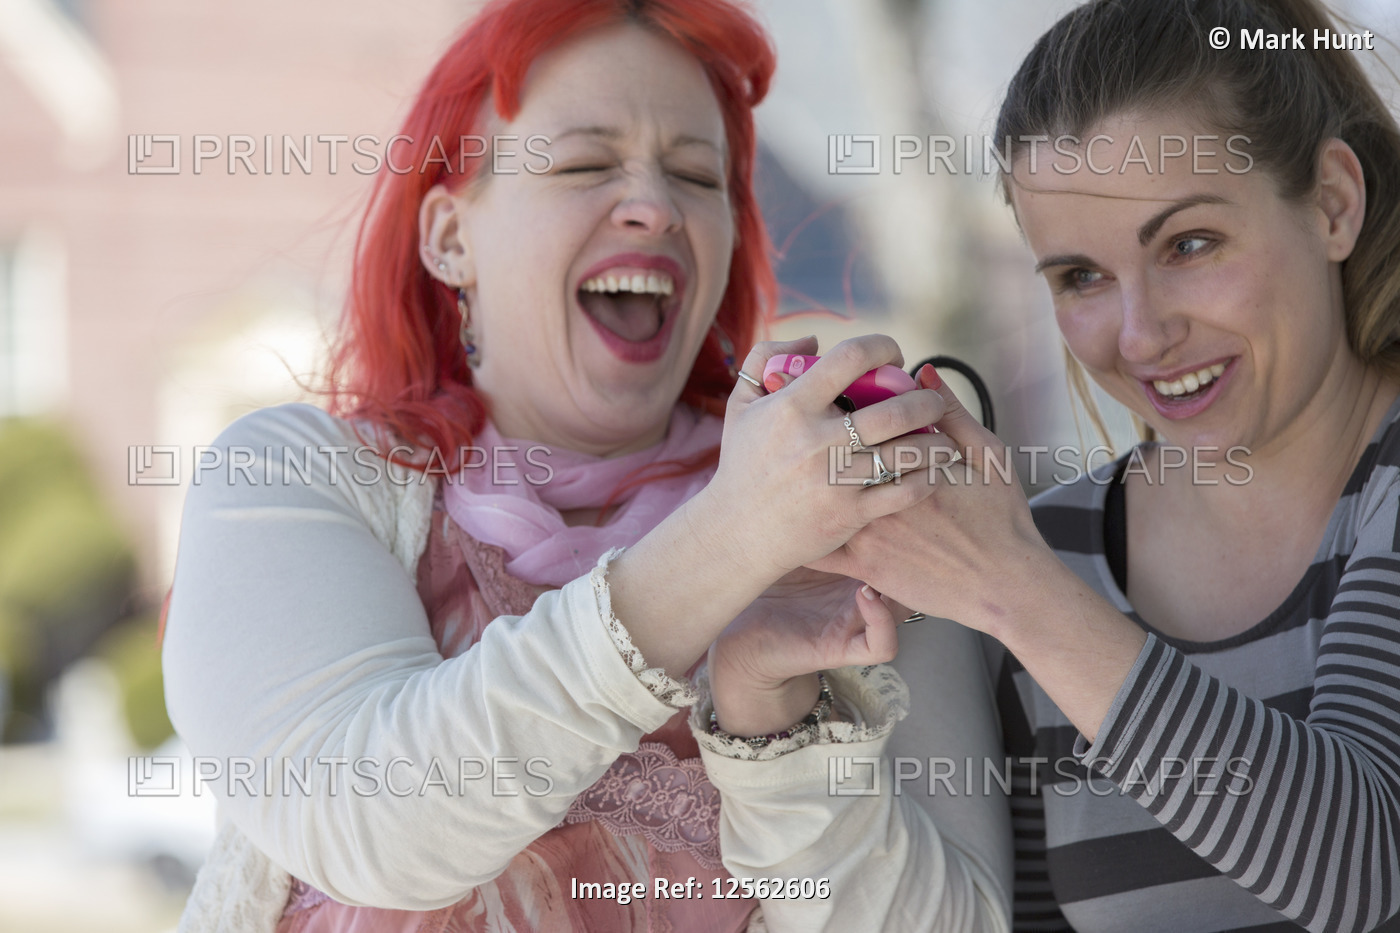 Blind young women using assistive technology on their cell phones and laughing